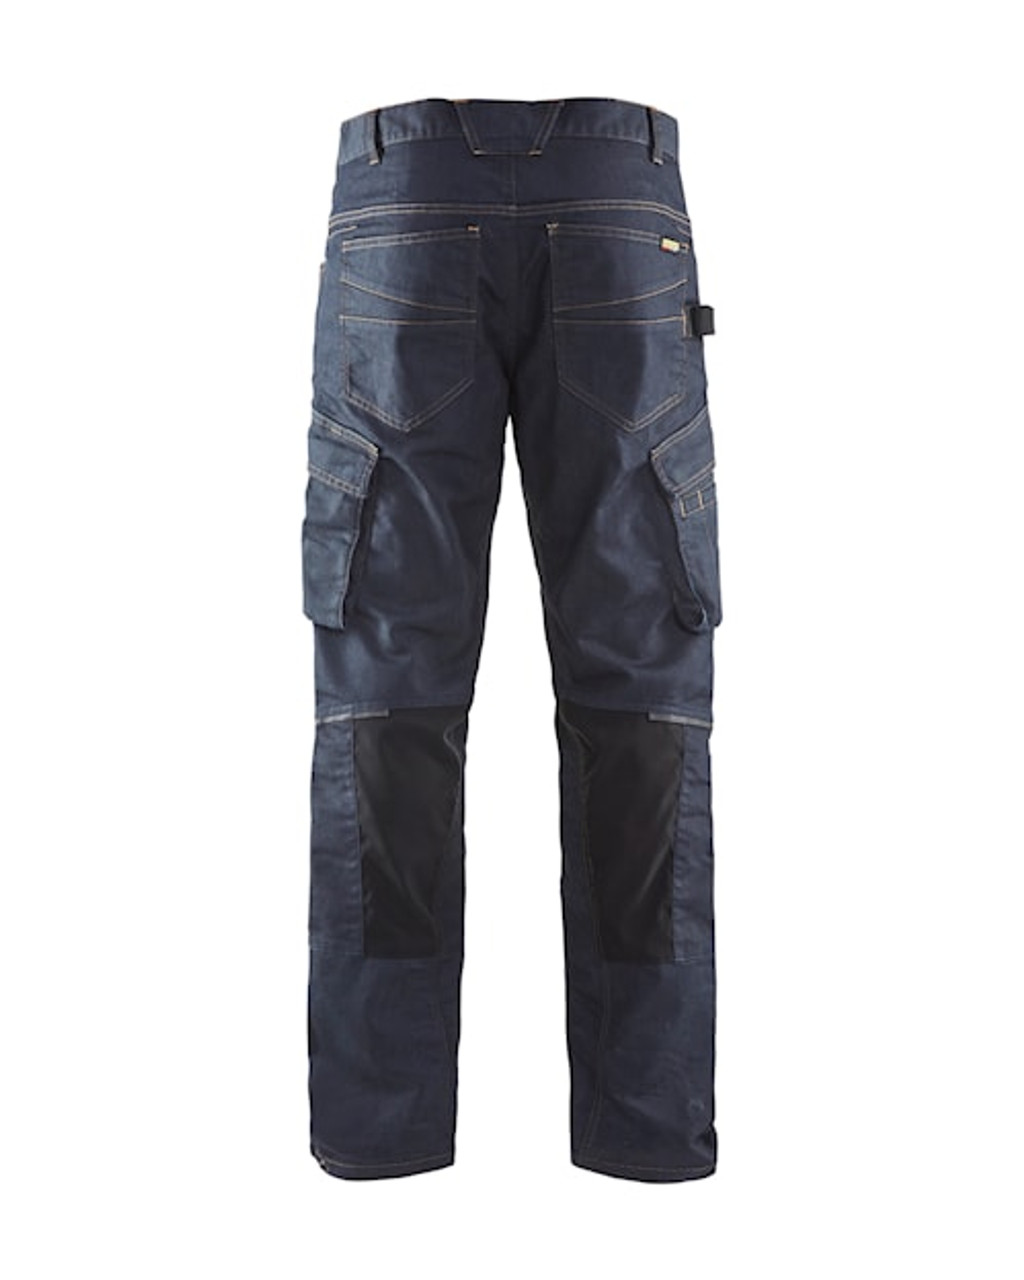 BLAKLADER Denim with Stretch Navy Blue Trousers for Electricians that have Kneepad Pockets  available in Australia and New Zealand